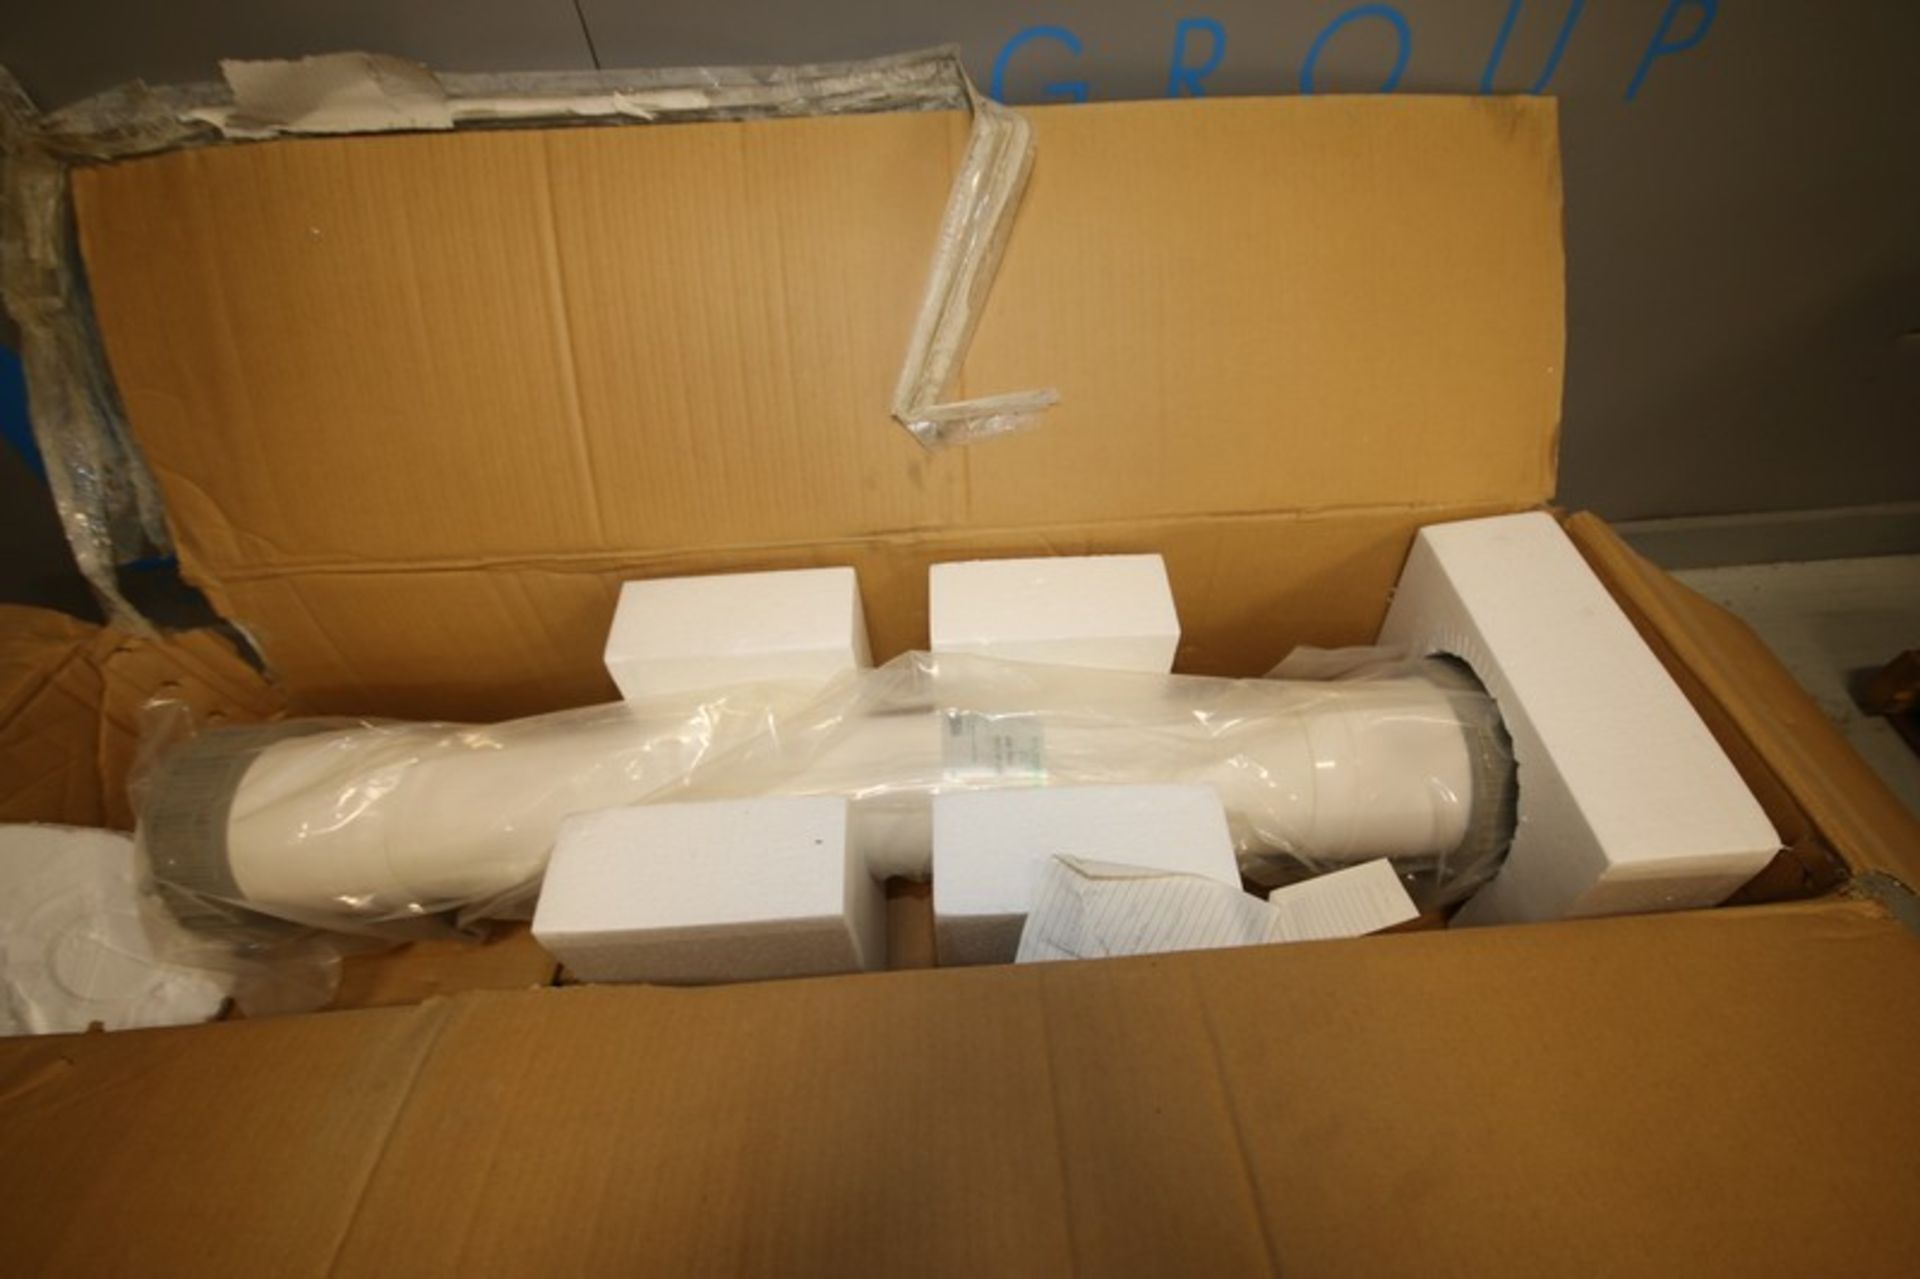 Lot of (2) Pall Microza Membranes,Part No. UMW-553 & WSP-543, 44" L with 3.5" Clamp Type - Image 3 of 3